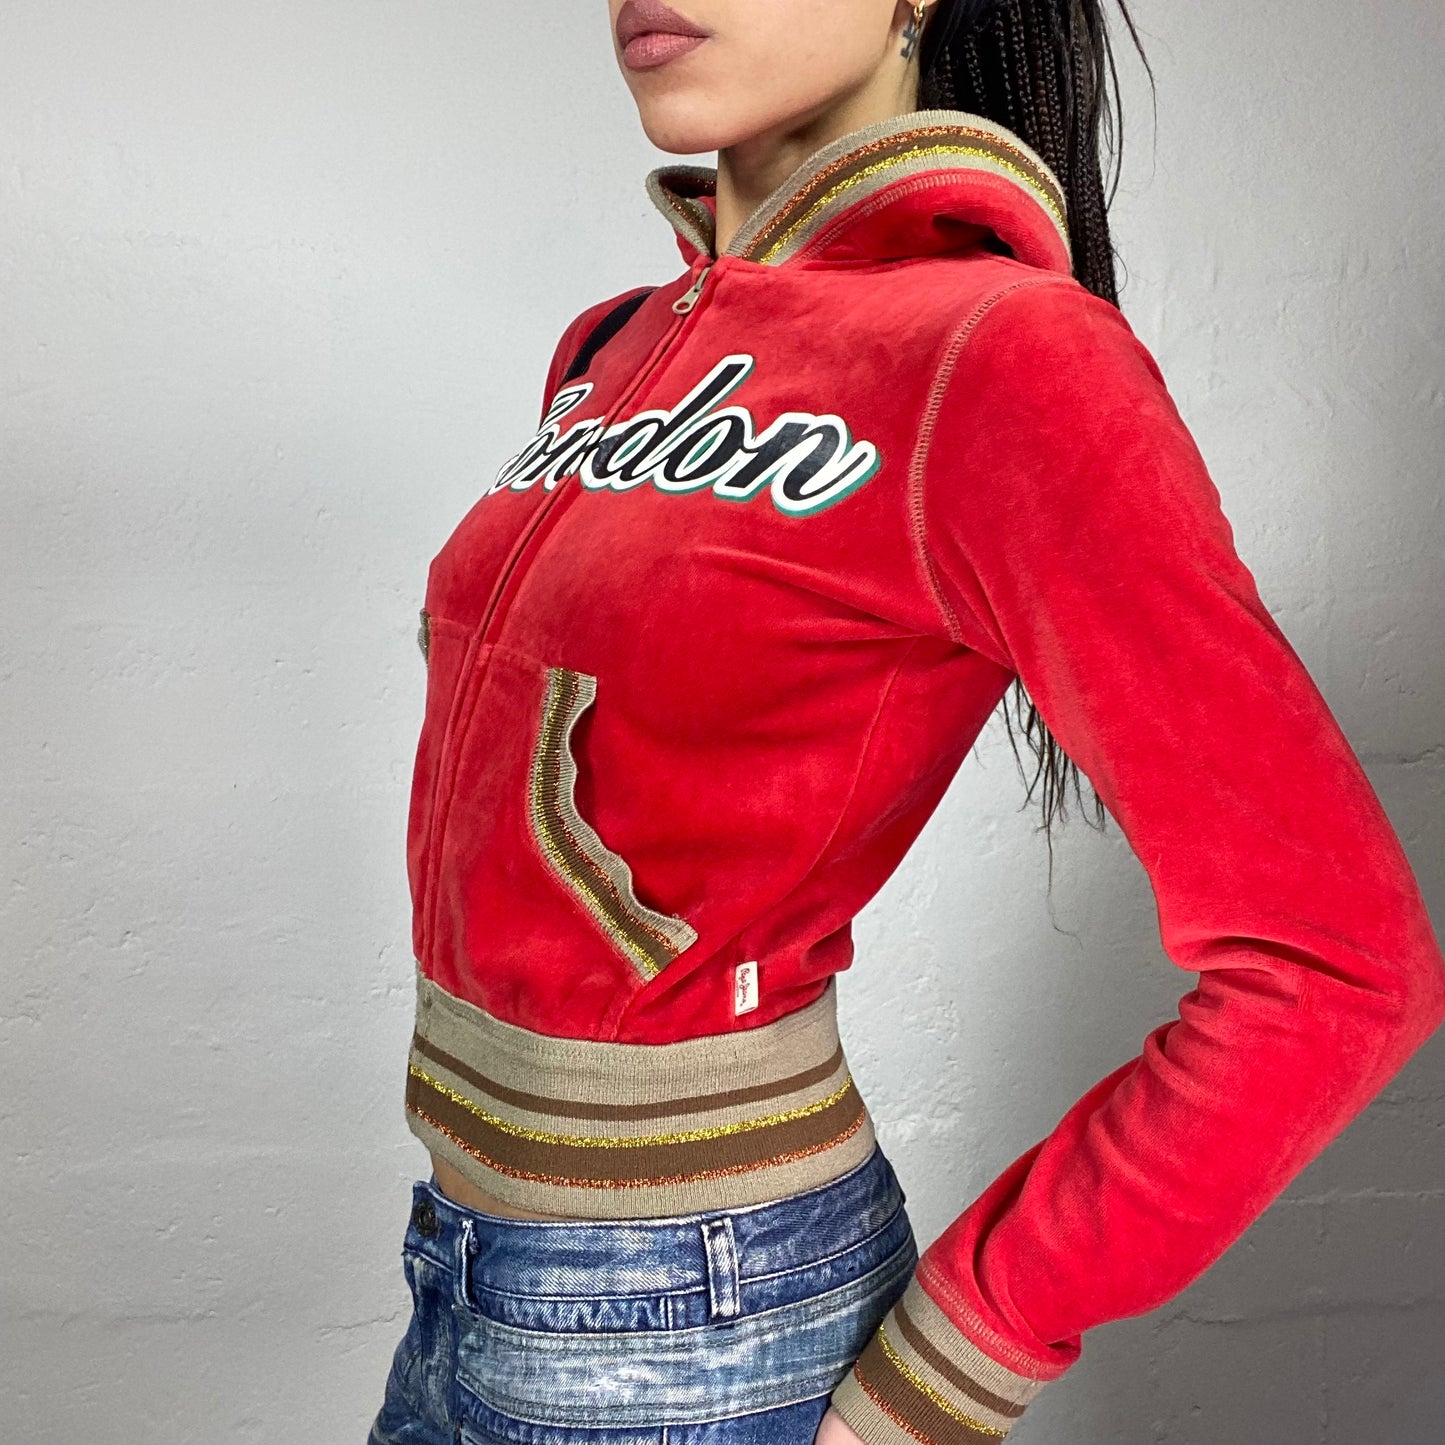 Vintage 2000's London Pepe Jeans Sporty Red Velvet Zip Up Jacket with Glitter Stripes Detail (S/M)